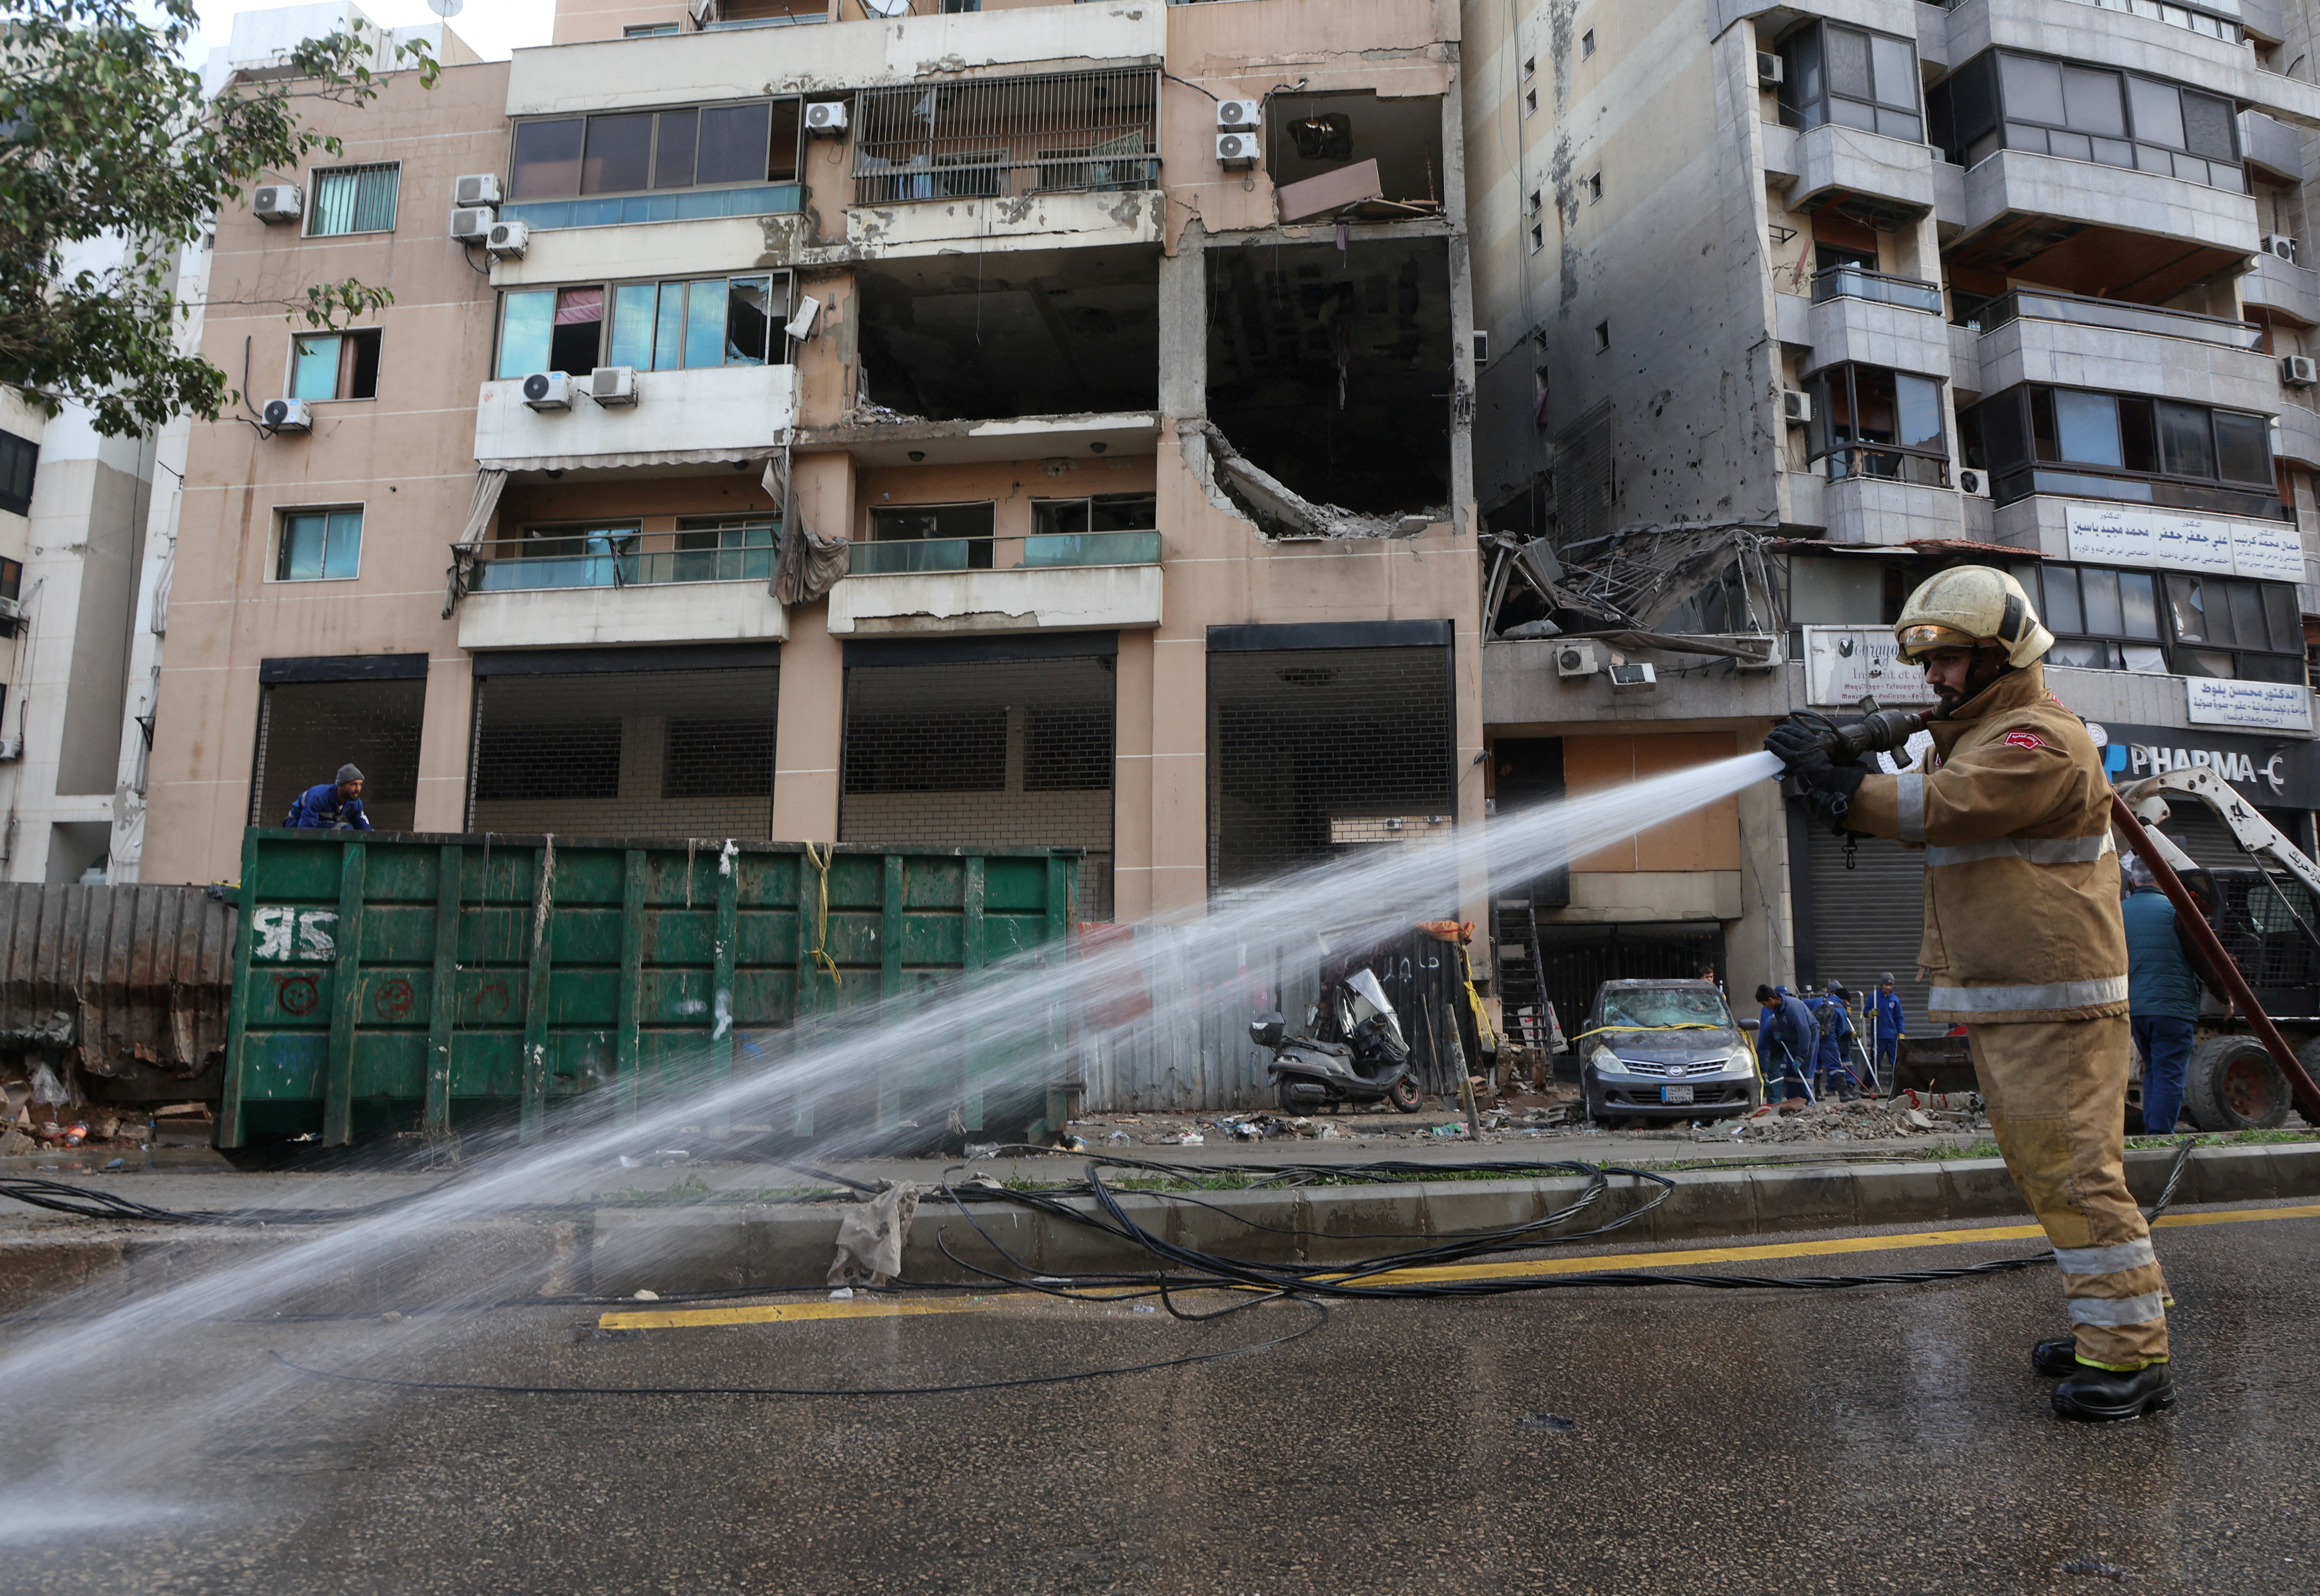 Hezbollah affiliated civil defence member sprays water at a damaged site in the aftermath of what security sources said was an Israeli drone strike in Beirut's southern suburbs of Dahiyeh